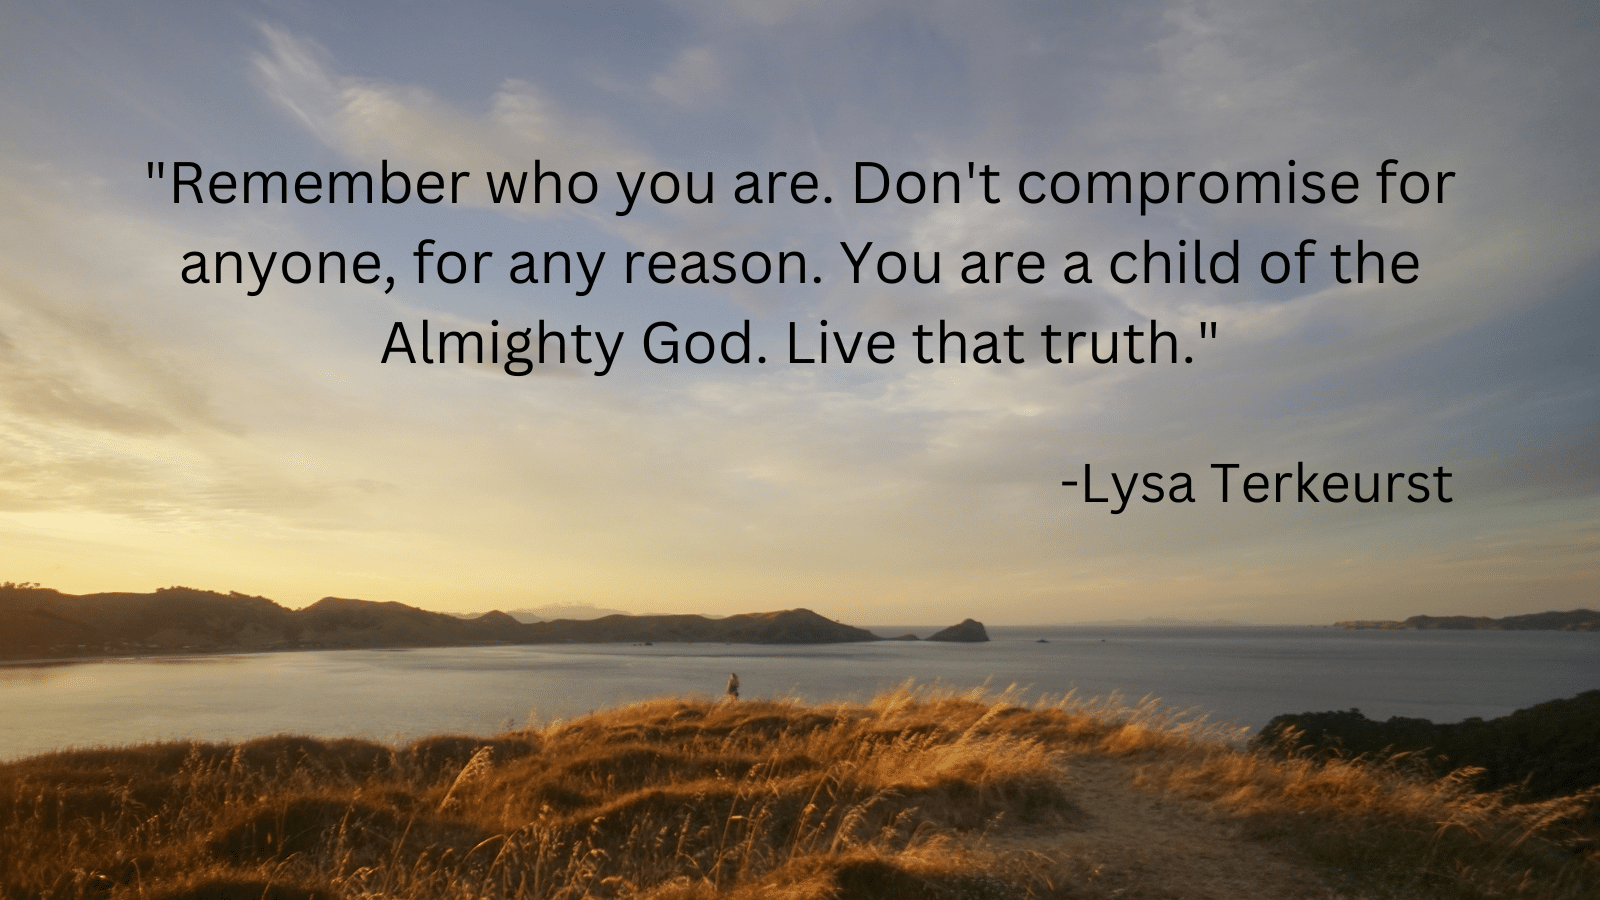 waterfront view with Lysa Terkeurst quote